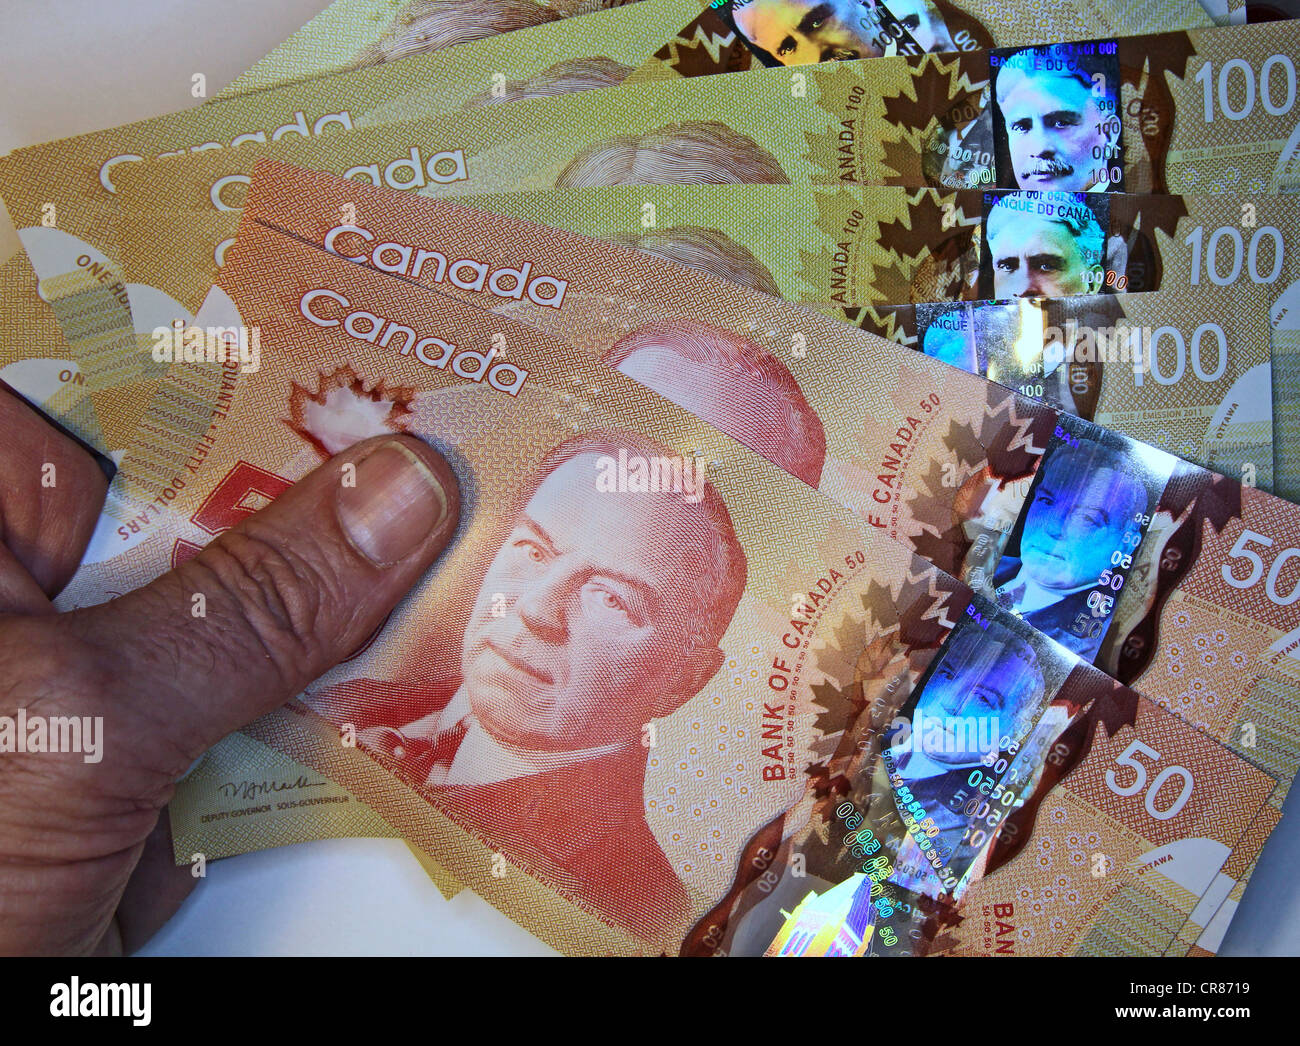 Canada's new anti-counterfeiting polymer banknotes Stock Photo